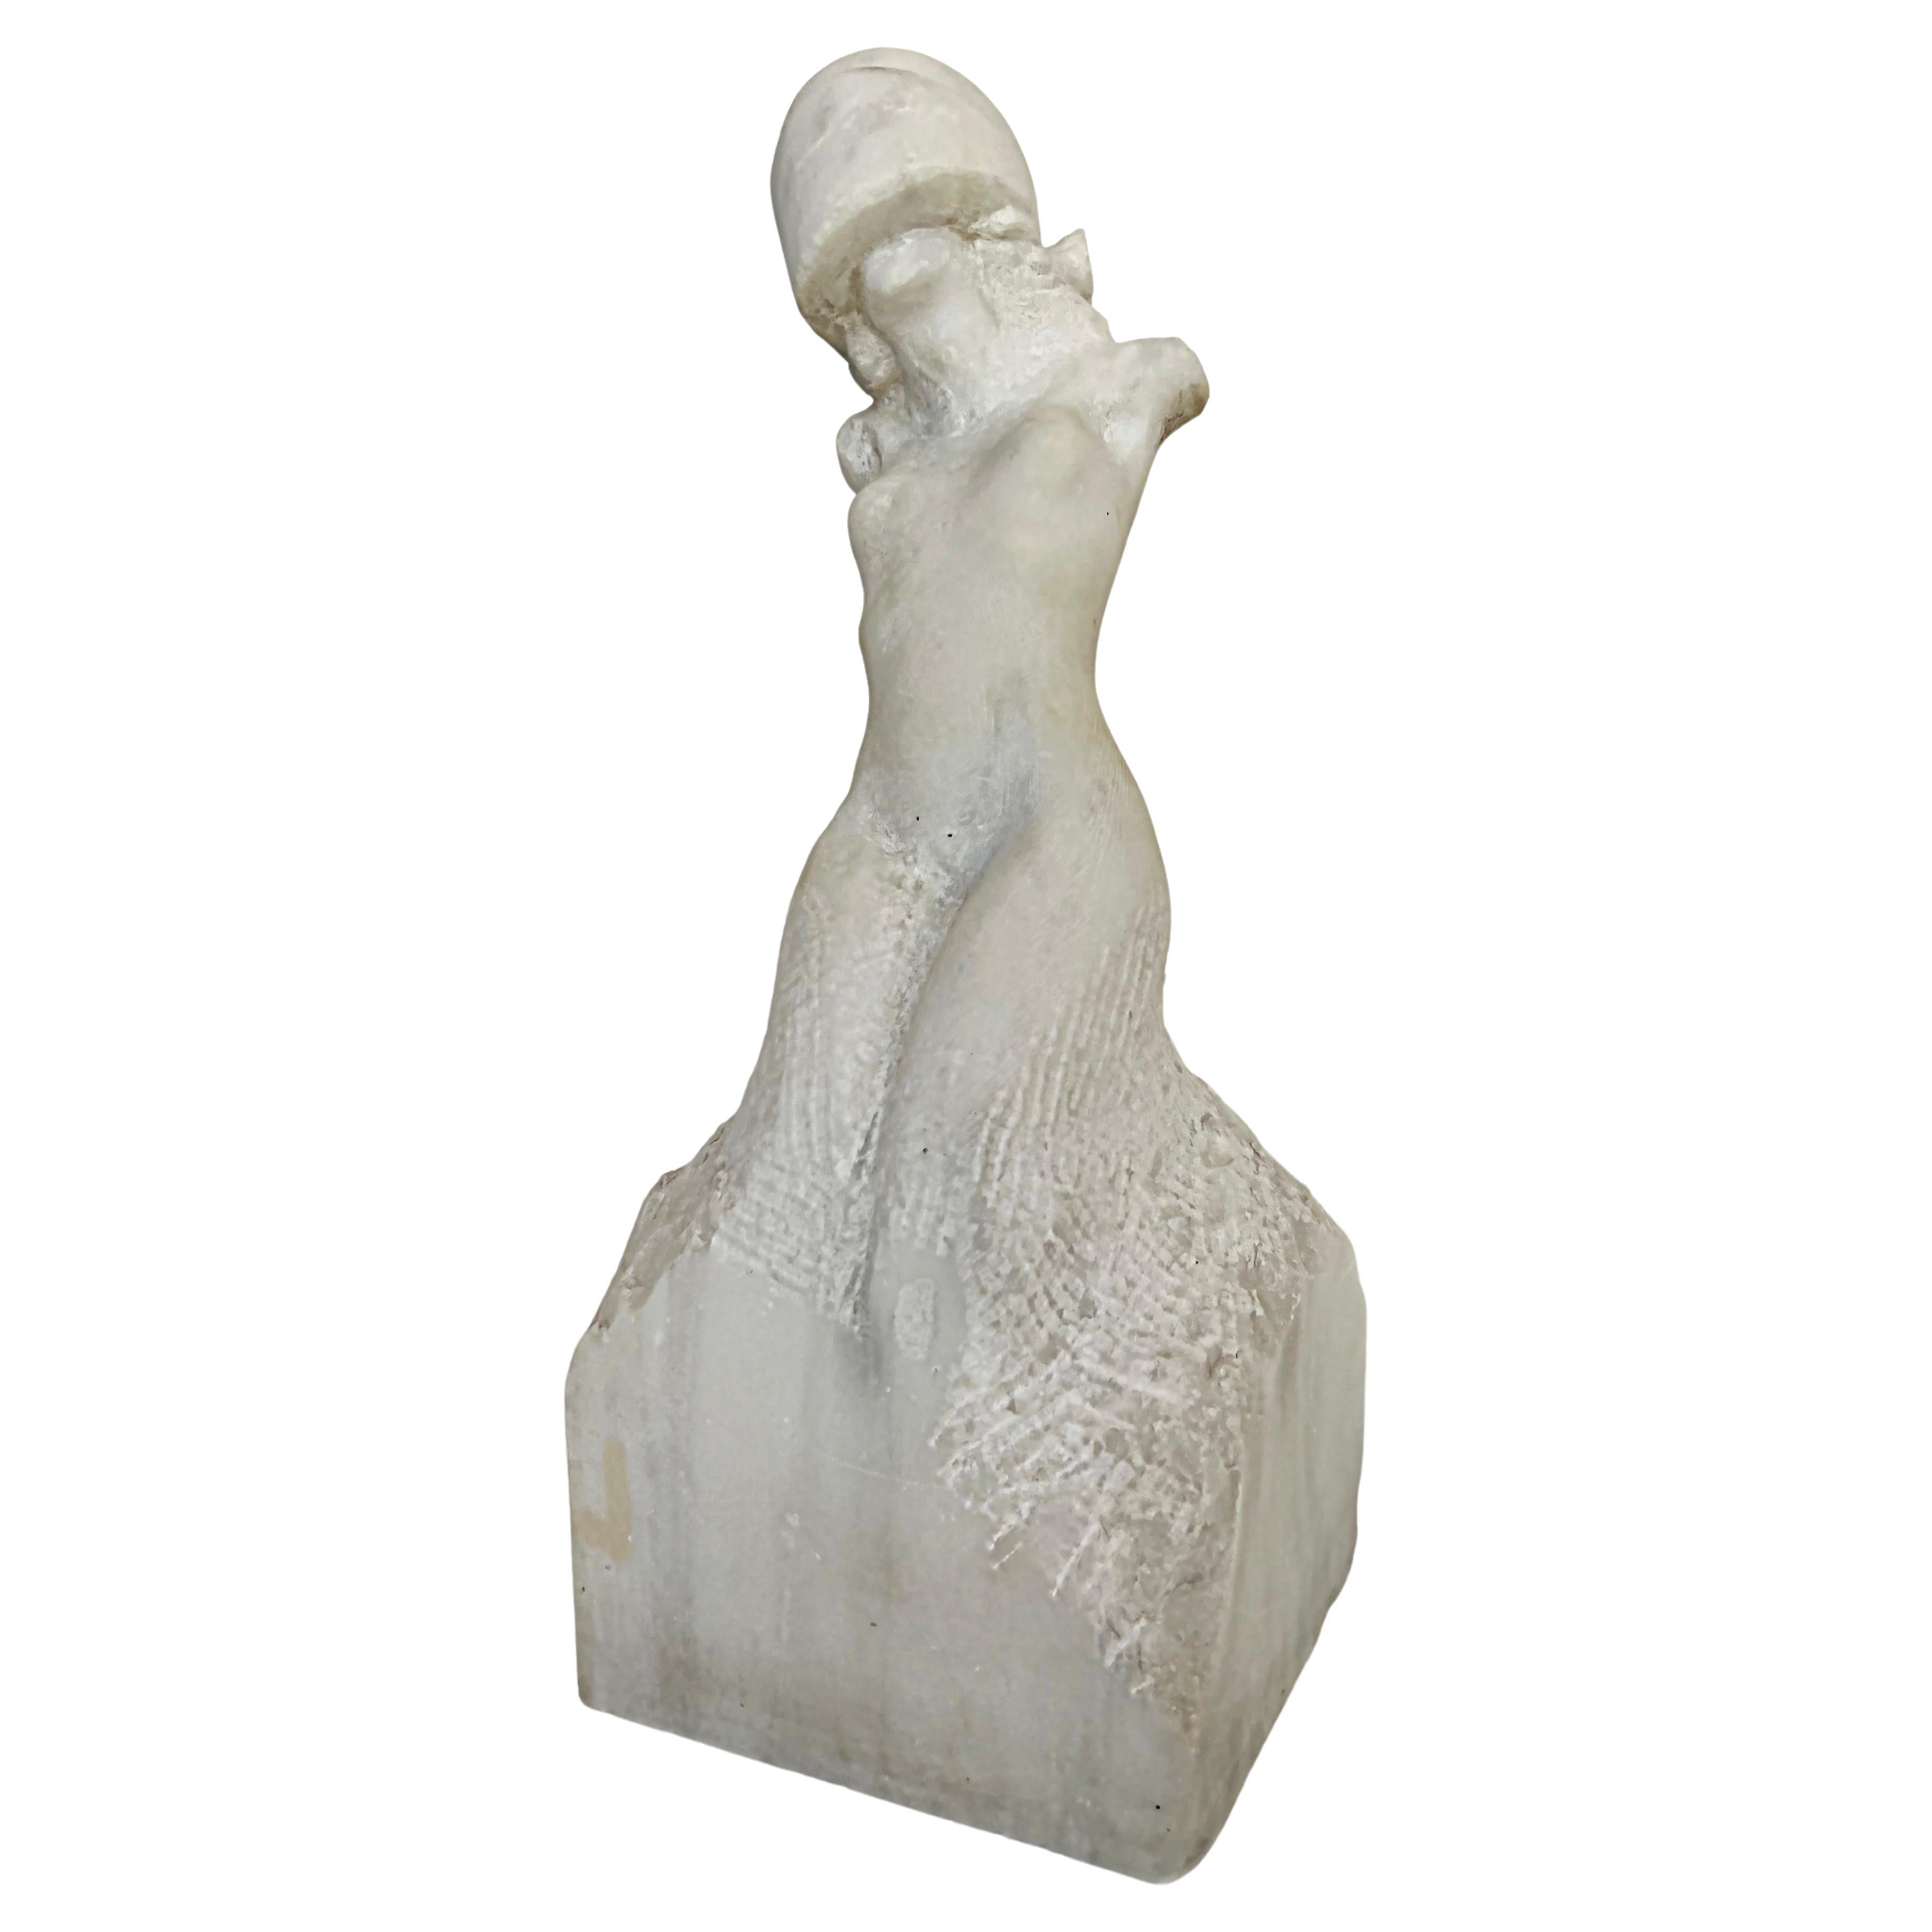 Offered for sale is a vintage 20th-century hand-carved marble sculpture of a classical nude female with an Art Deco helmet. The sculpture is created in the manner of Marc Quinn or Leo Caillard with their mixing of old and new styles The sculpture